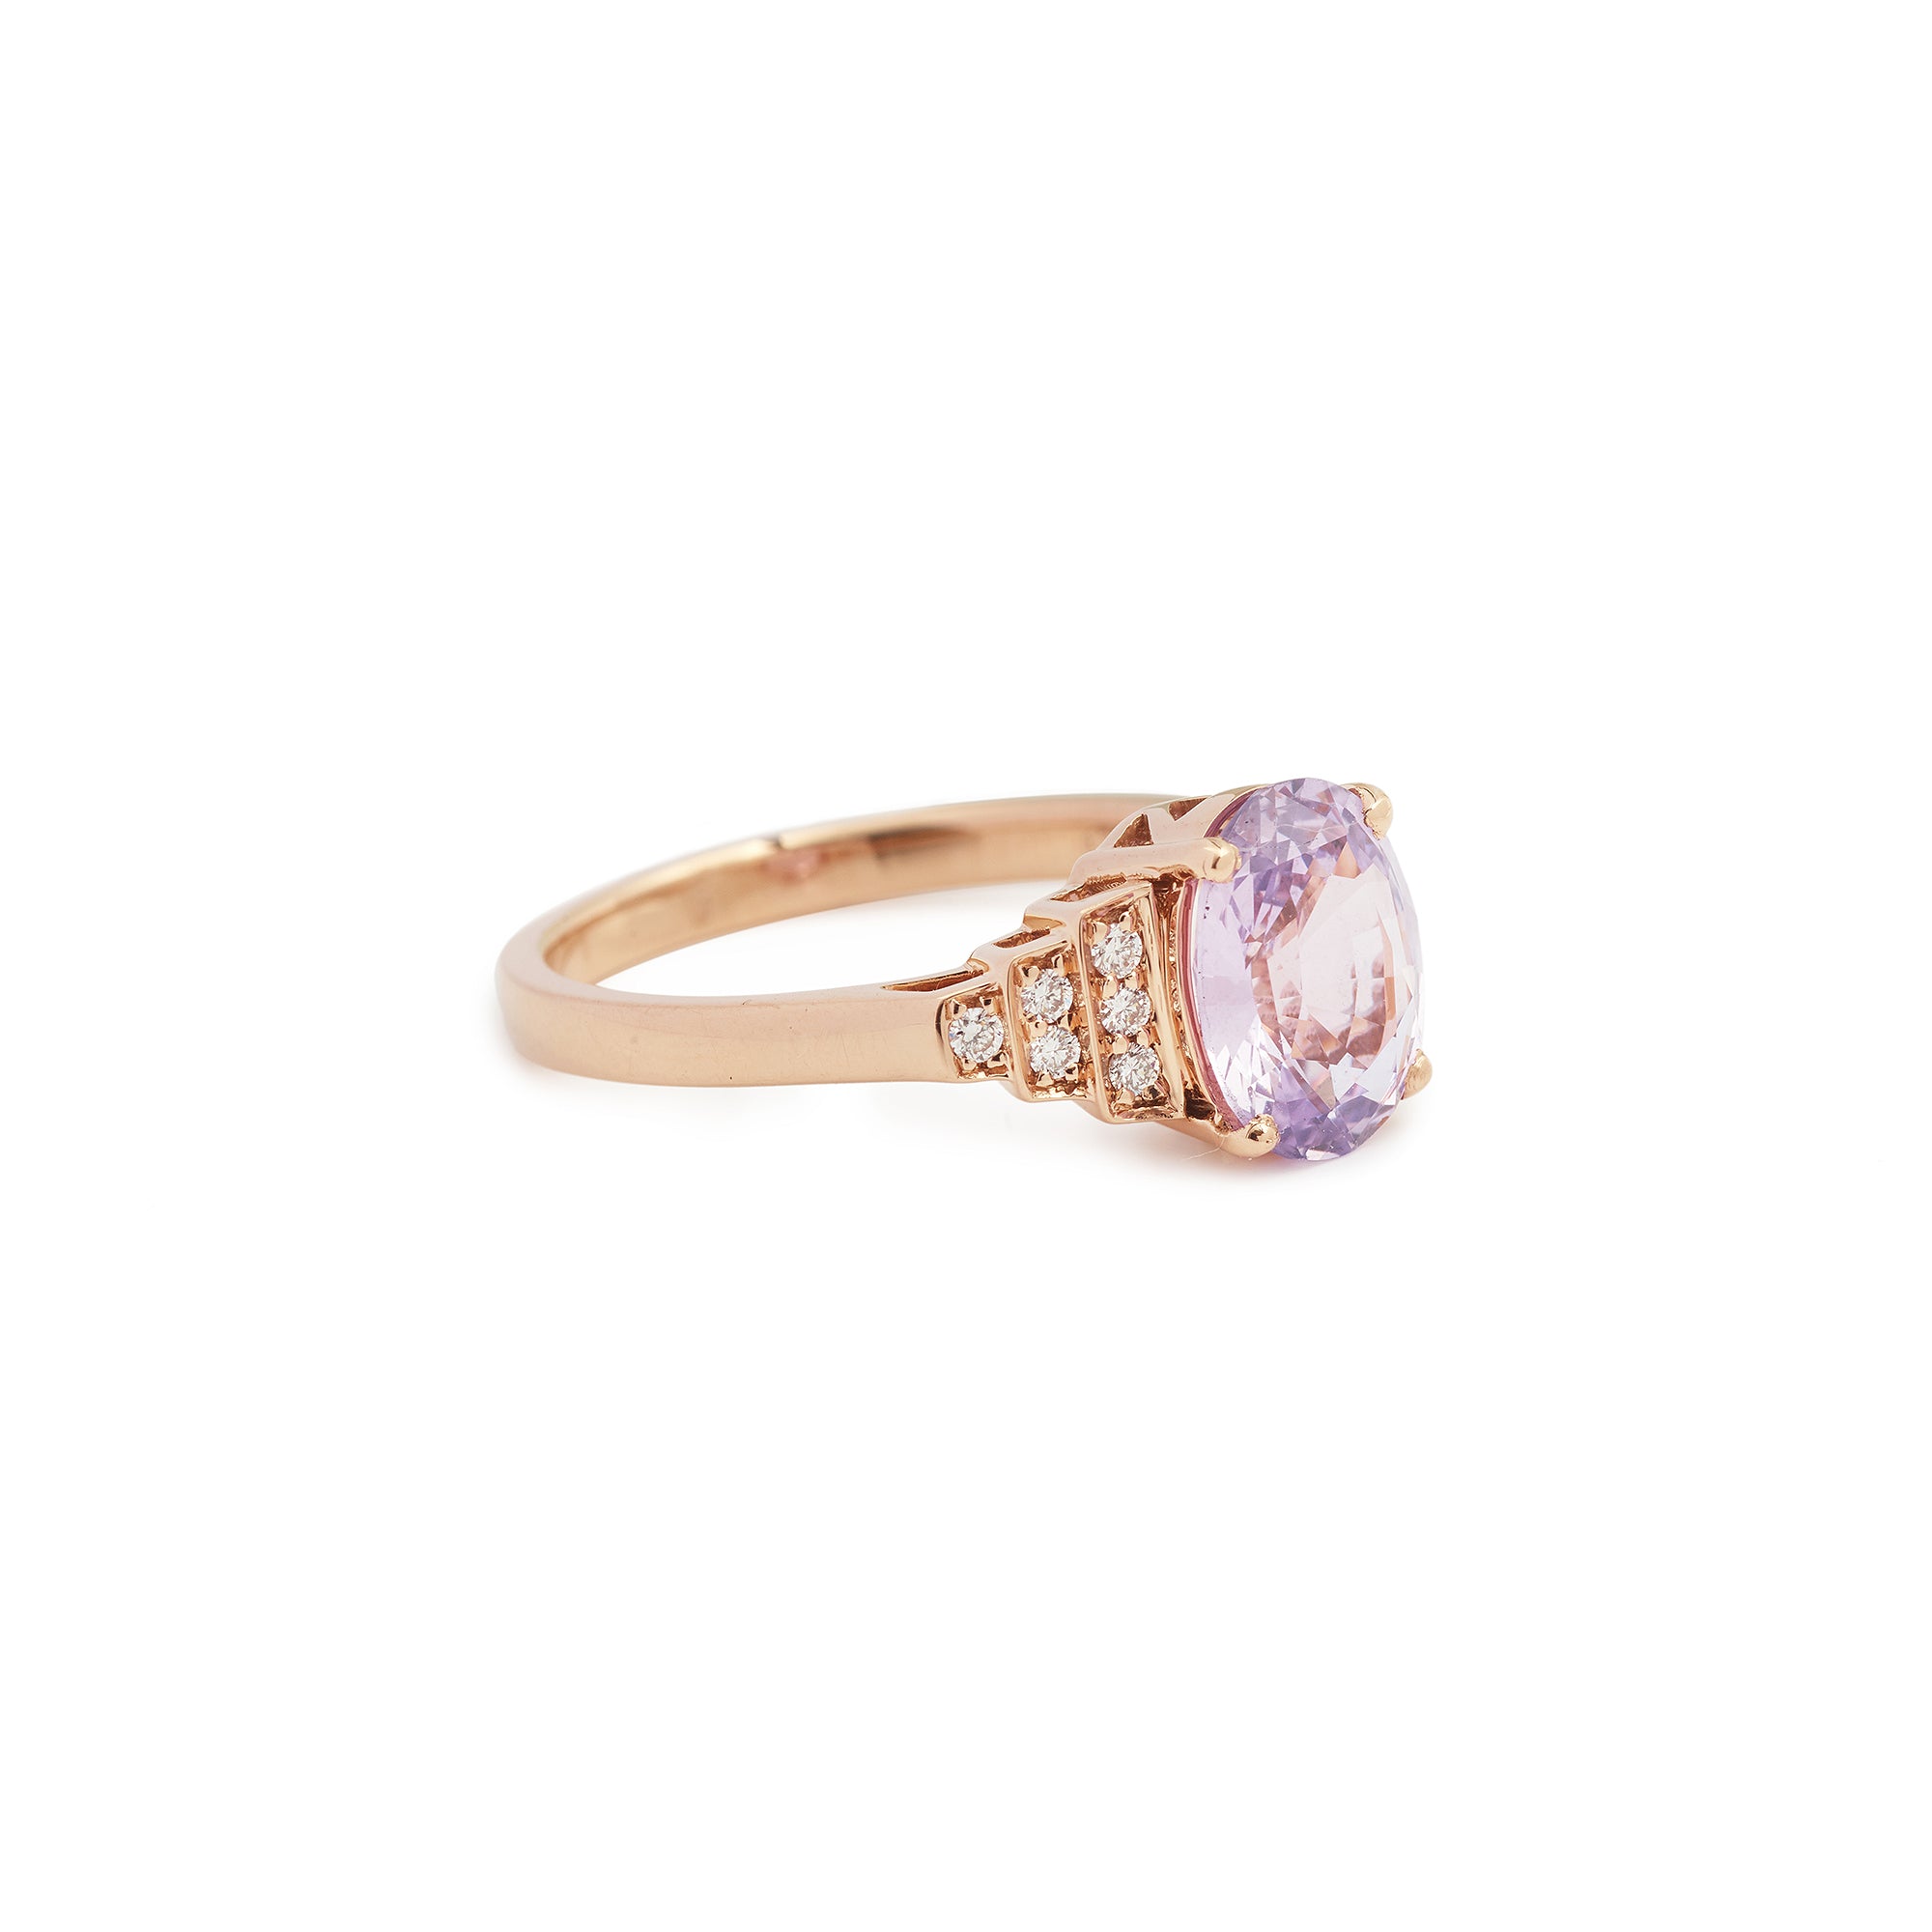 Unheated Madagascar 2.19cts Lilac Sapphire Diamonds 18 Carat Rose Gold Ring (Certified)